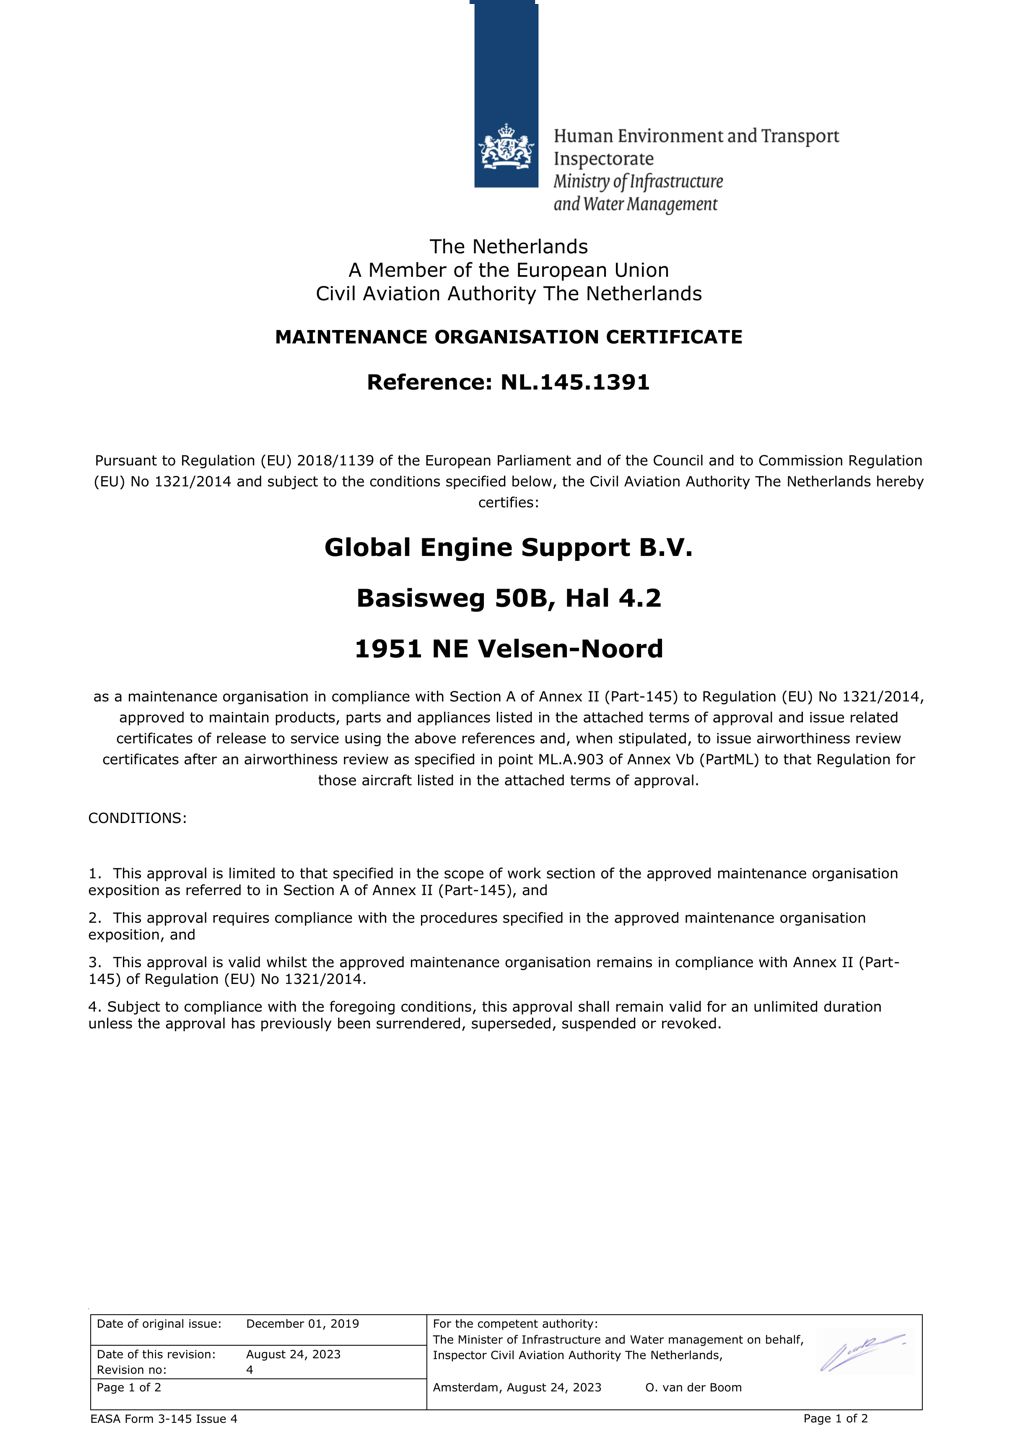 Maintenance Orgainsation Approval Certificate | Global Engine Support